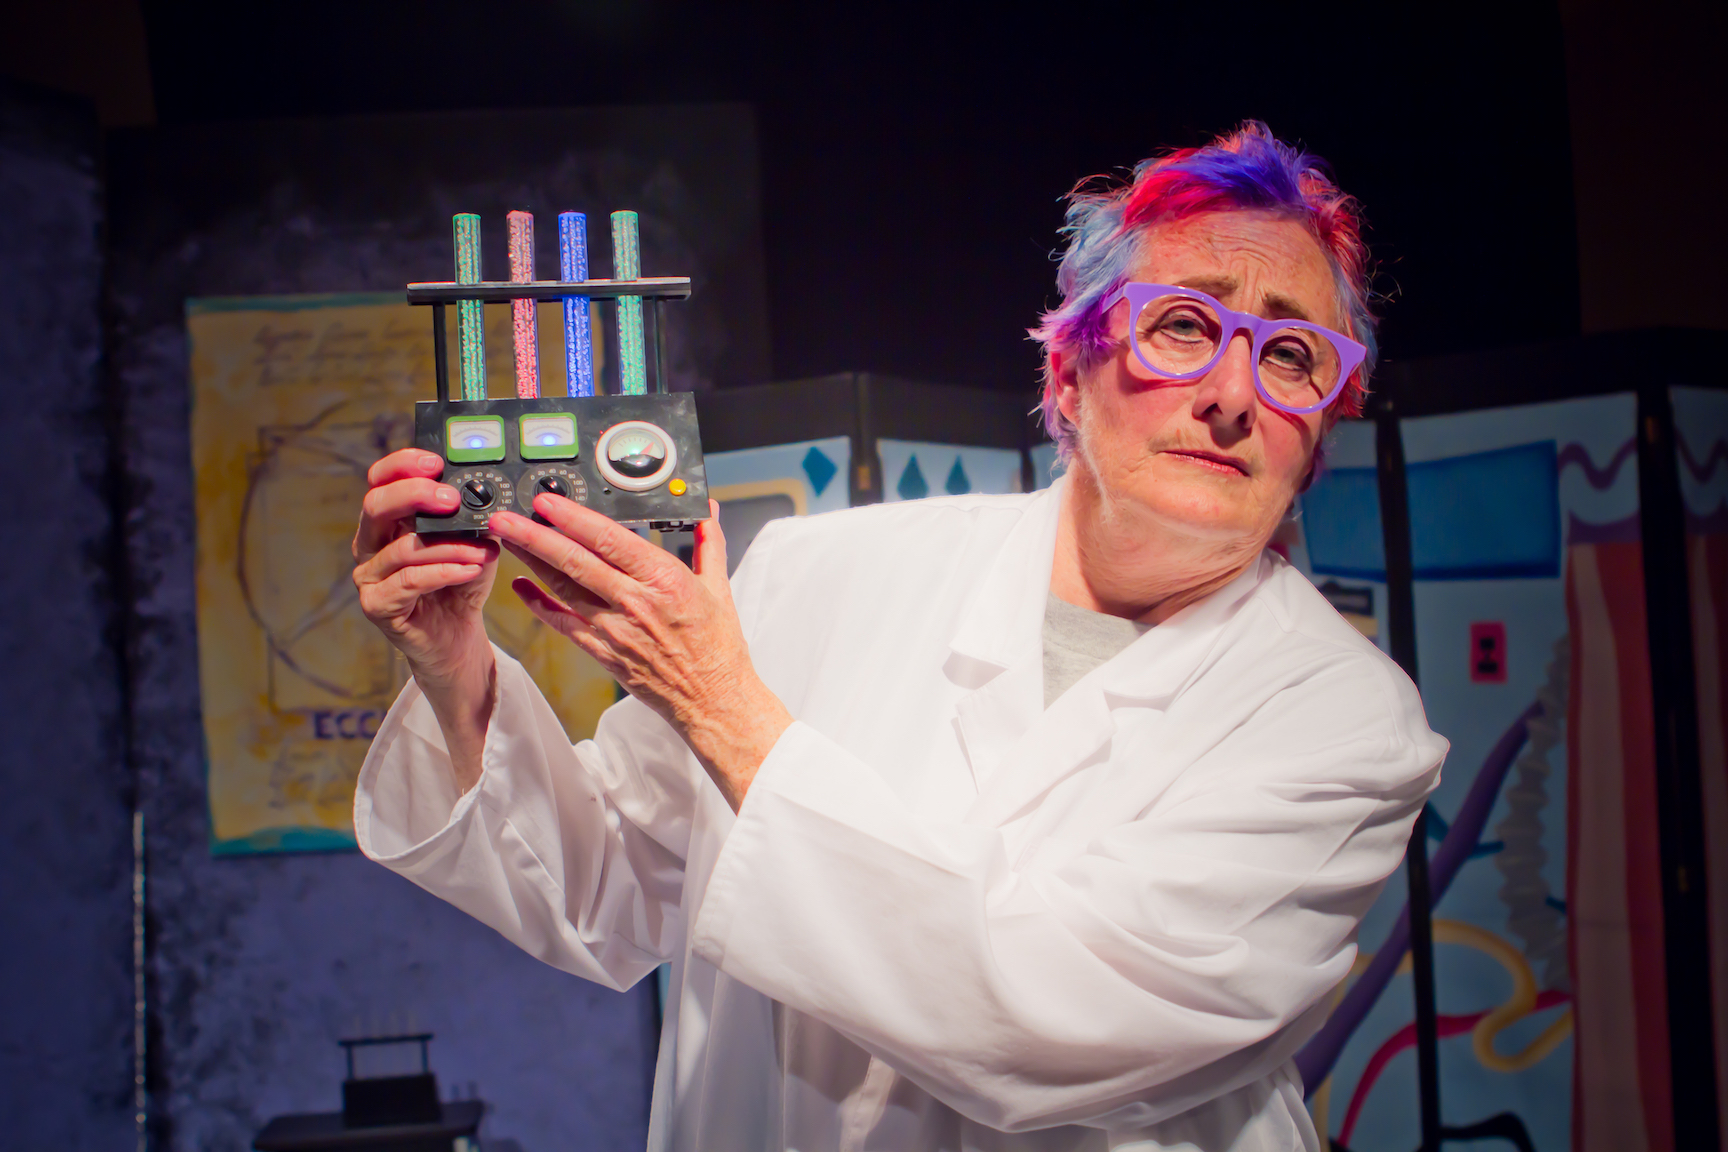 Terry as Dr. Gertrude Lesbostein in her play “Bride of Lesbostein,” a production of The Crackpot Crones, 2013. Photo credit: Liz Payne. Photo courtesy of Terry Baum.